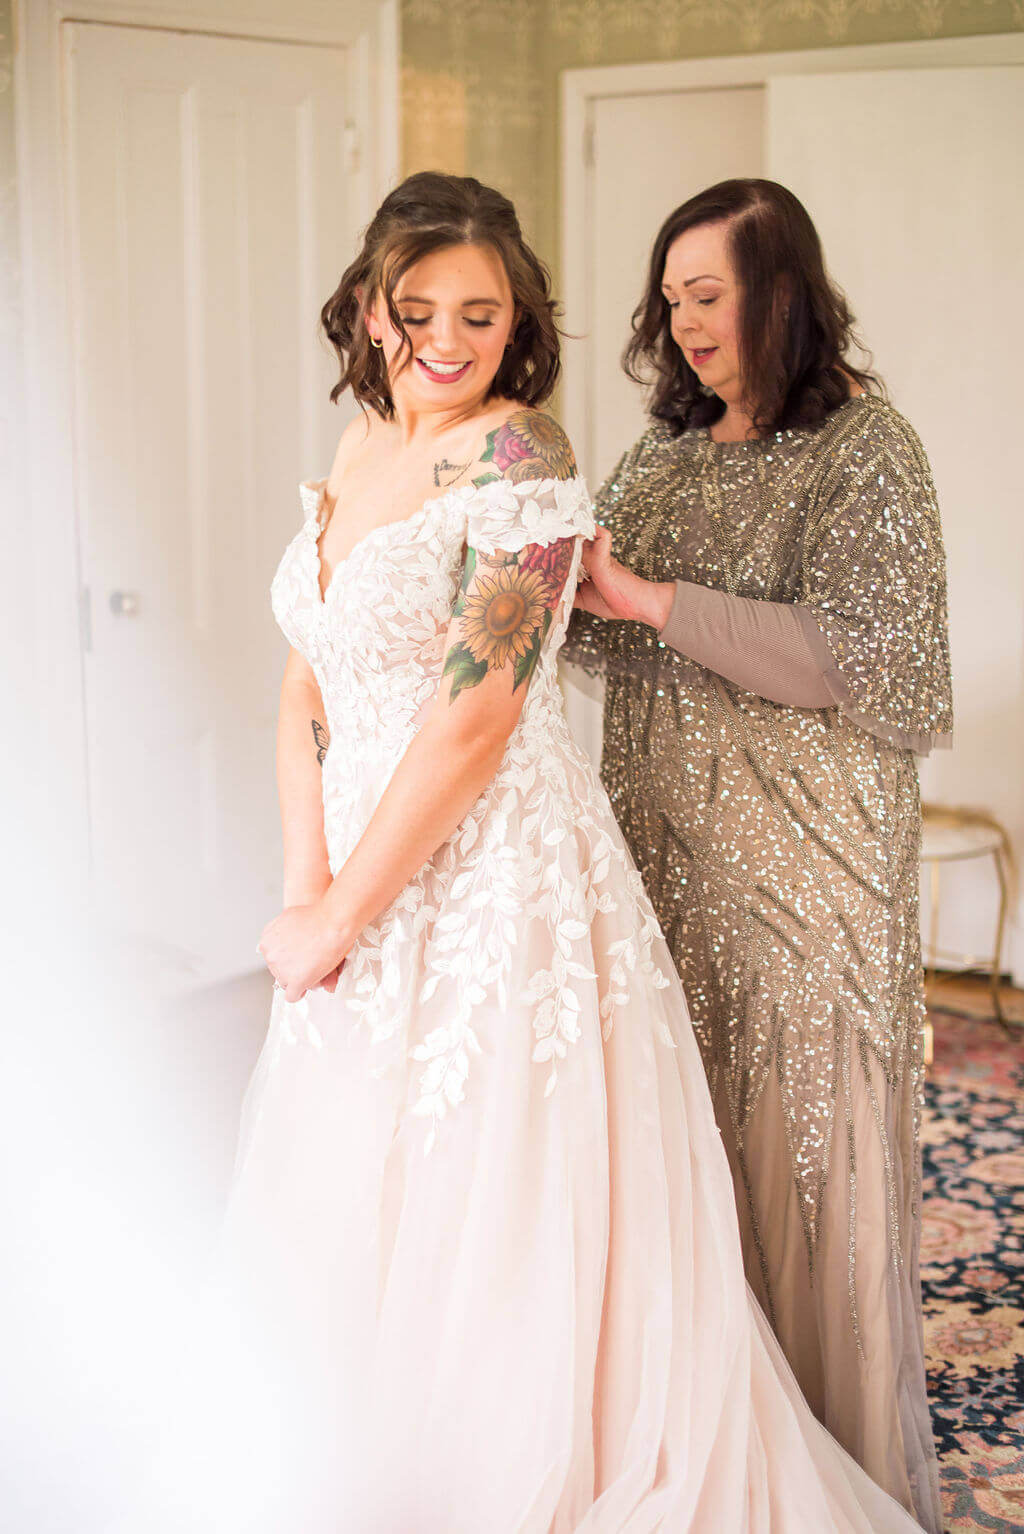 Mother of the Bride Zipping Up Daughters wedding dress